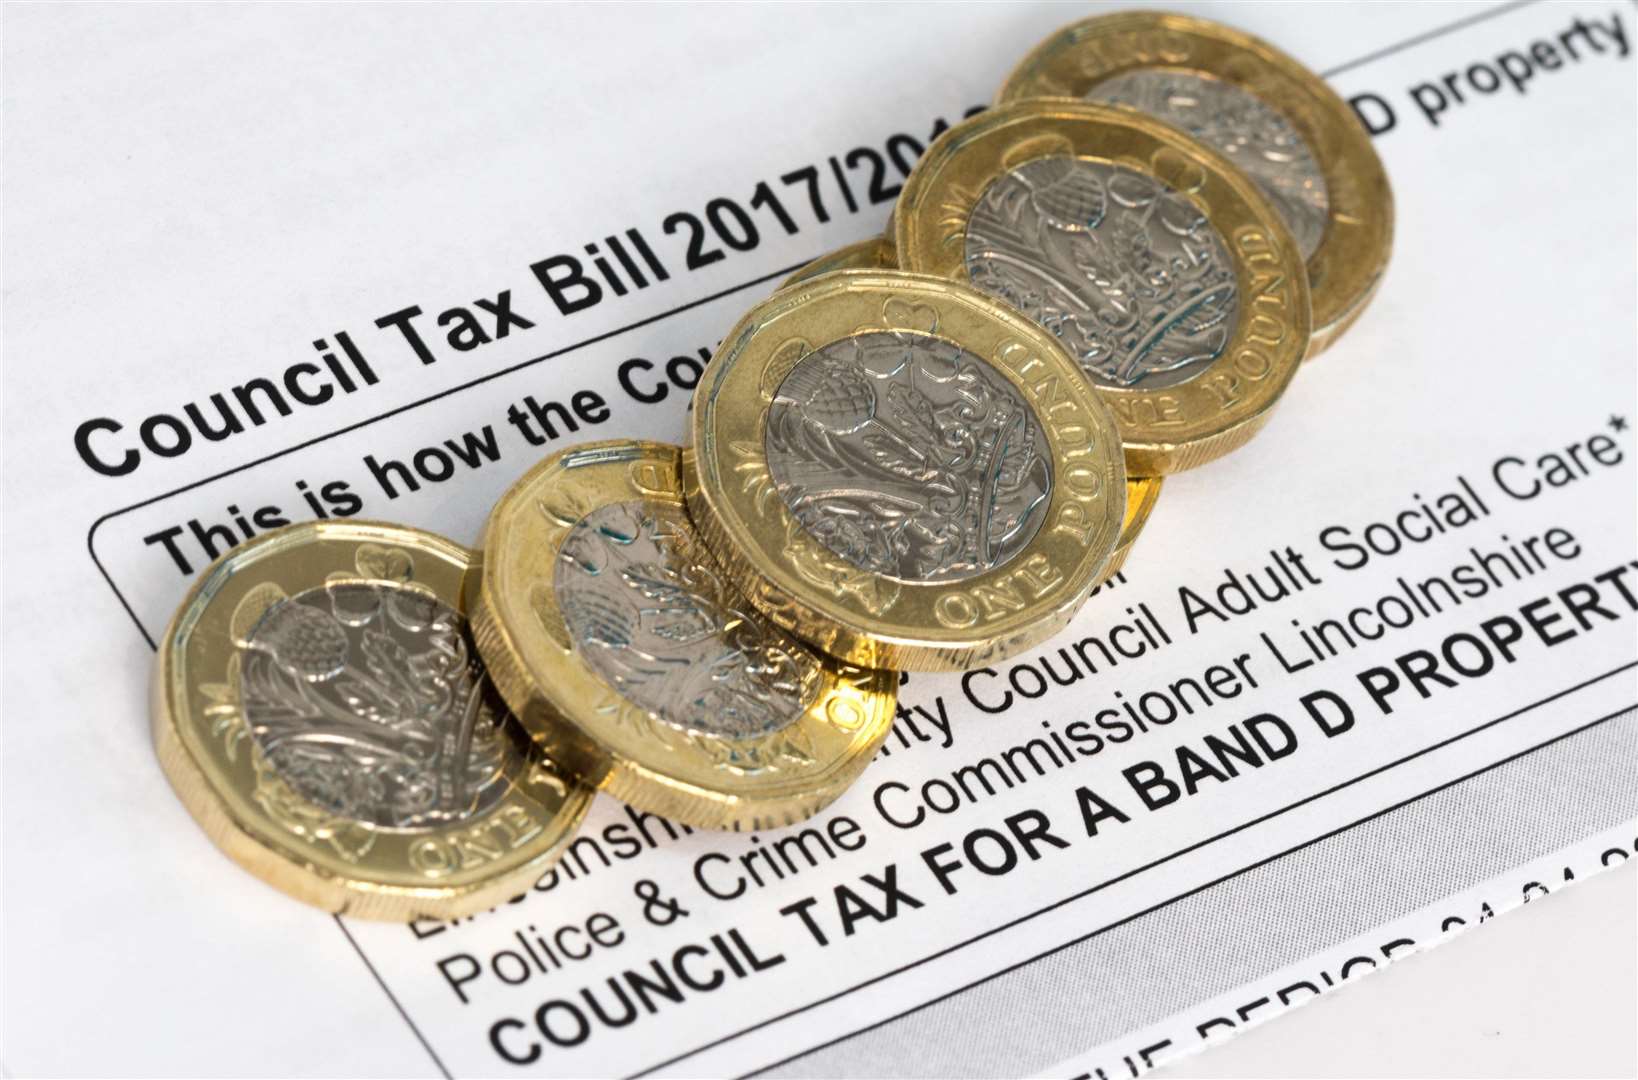 Taxpayers could end up paying £12 more than they did last year